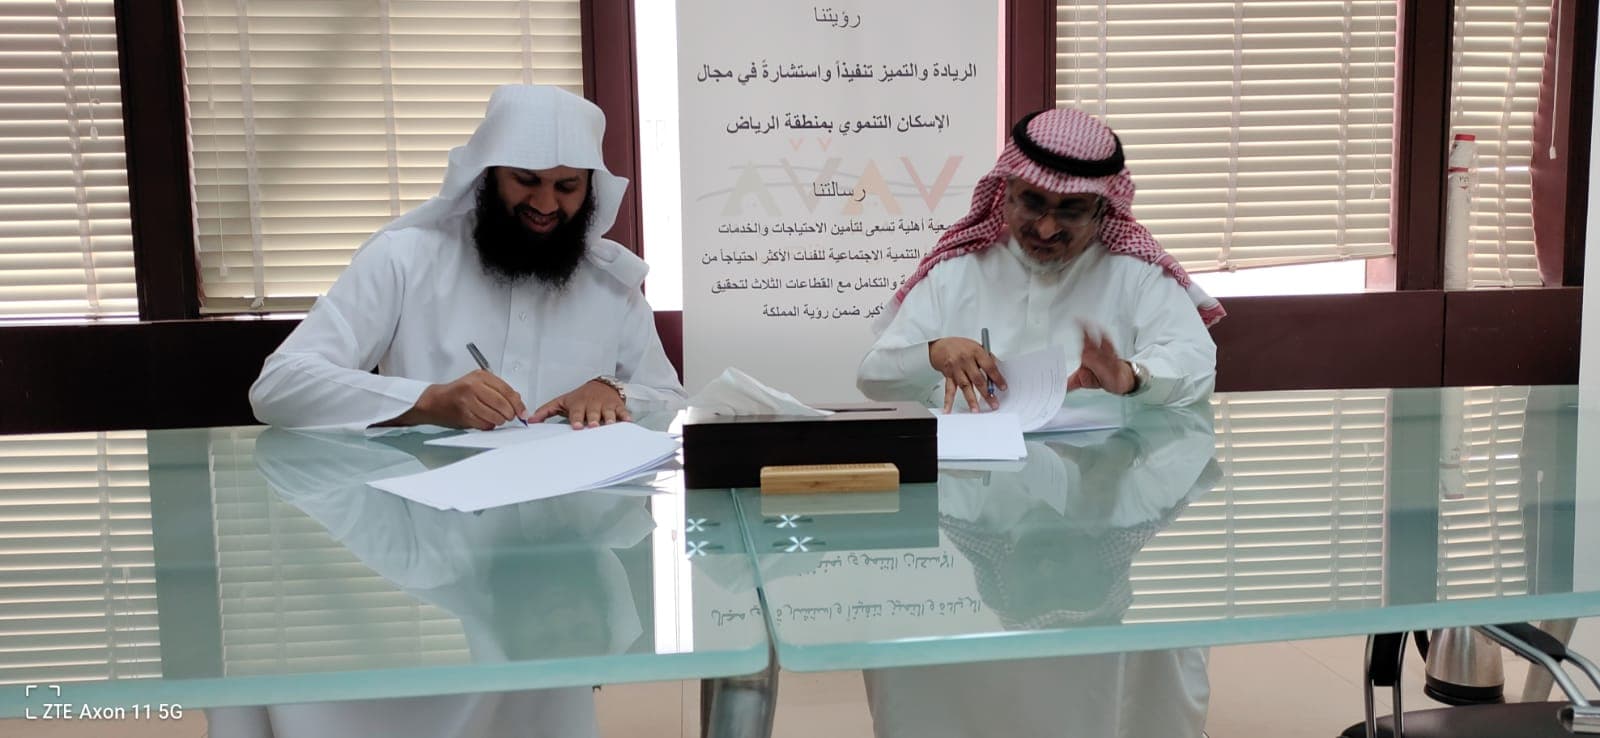 Signing an agreement for designing and development the Bayti Association website